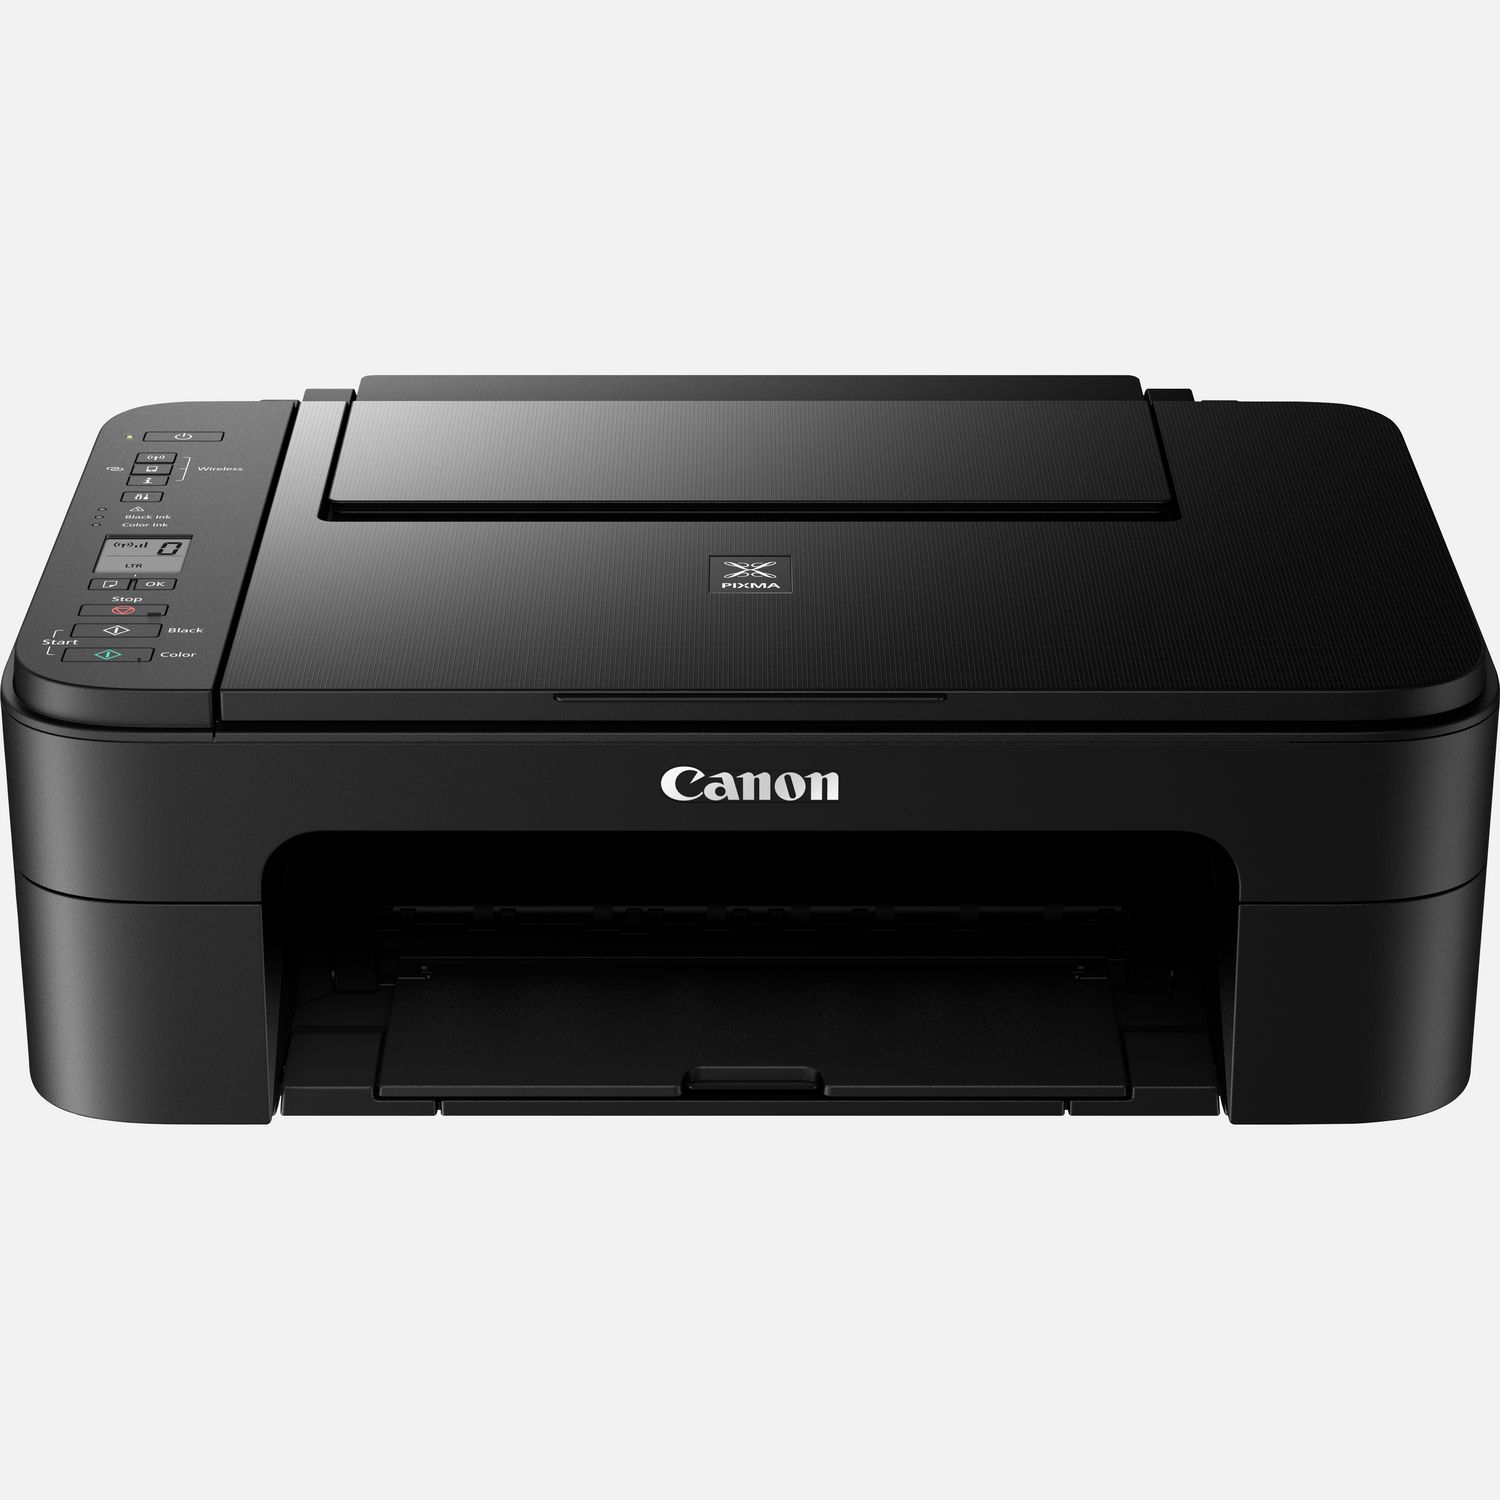 Canon Pixma TS3450/TS3351: How to Replace/Change Ink Cartridges 